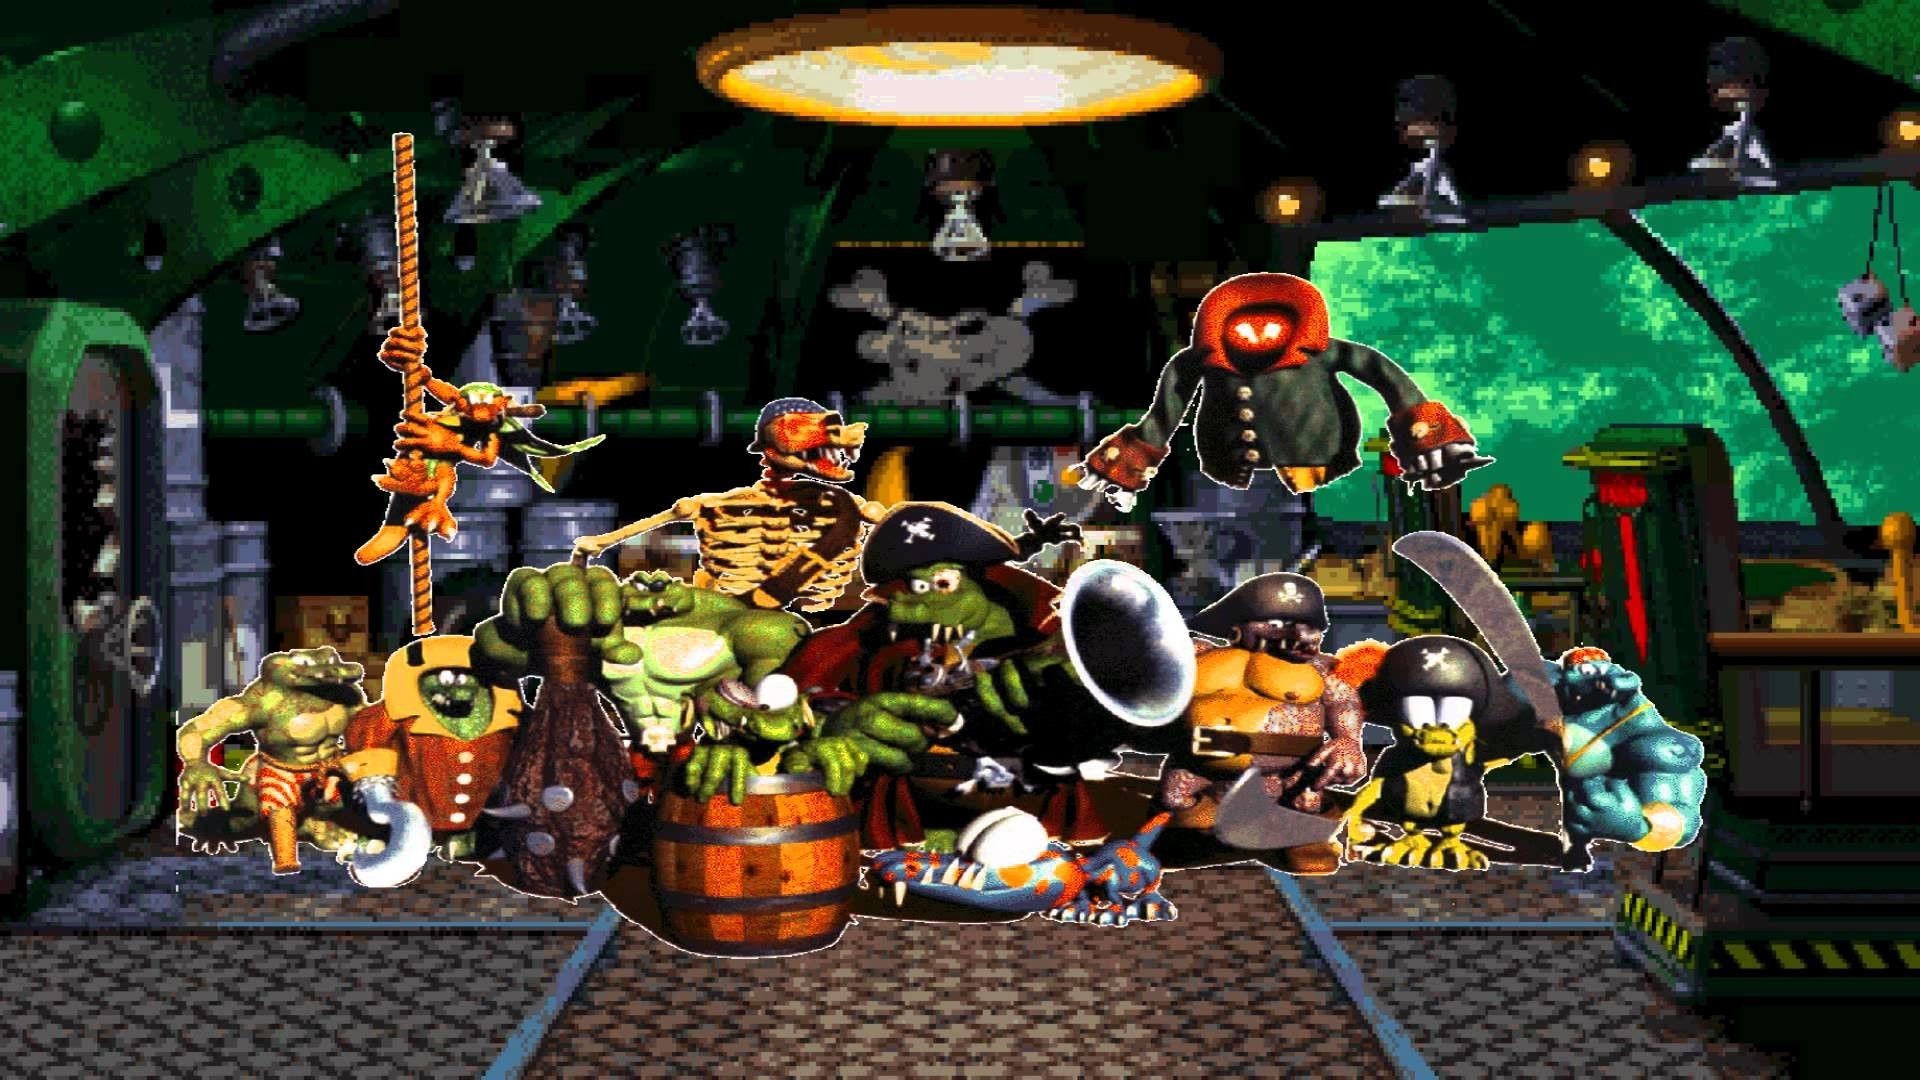 1920x1080 Donkey Kong Country 2 Wallpaper 79+ - Page 3 of 3 - xshyfc.com